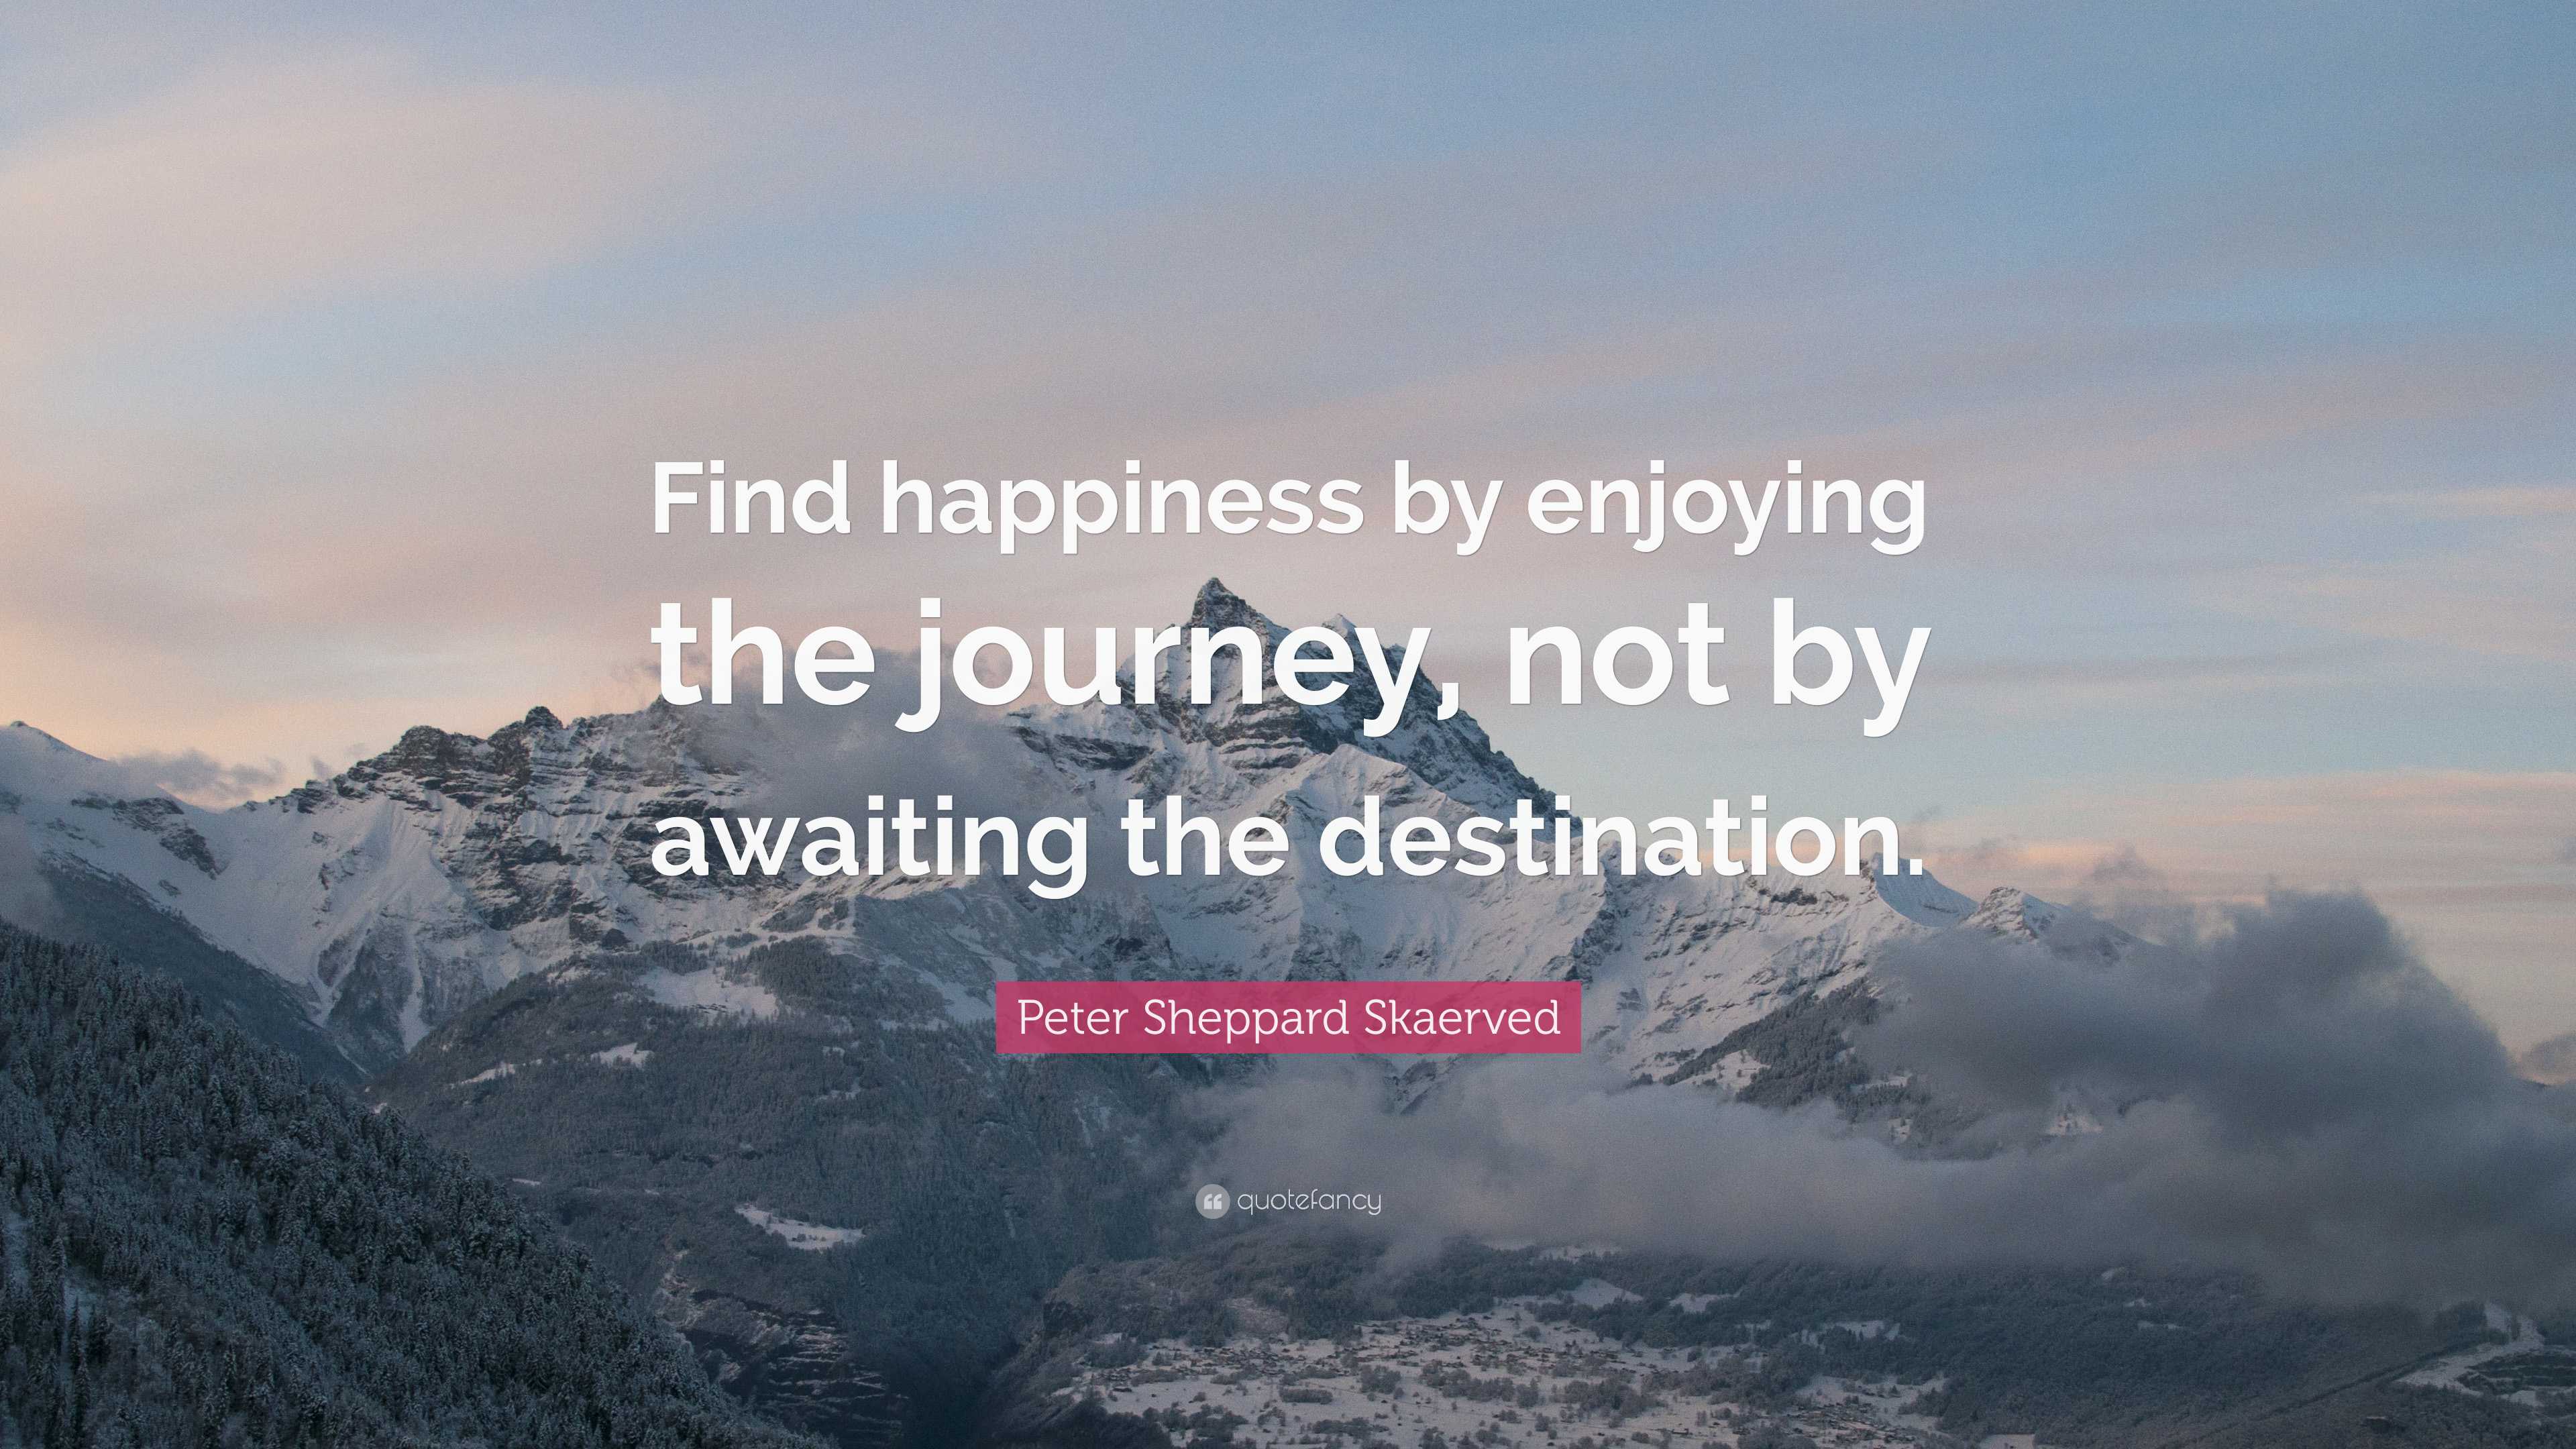 Peter Sheppard Skaerved Quote: “Find happiness by enjoying the journey, not  by awaiting the destination.”